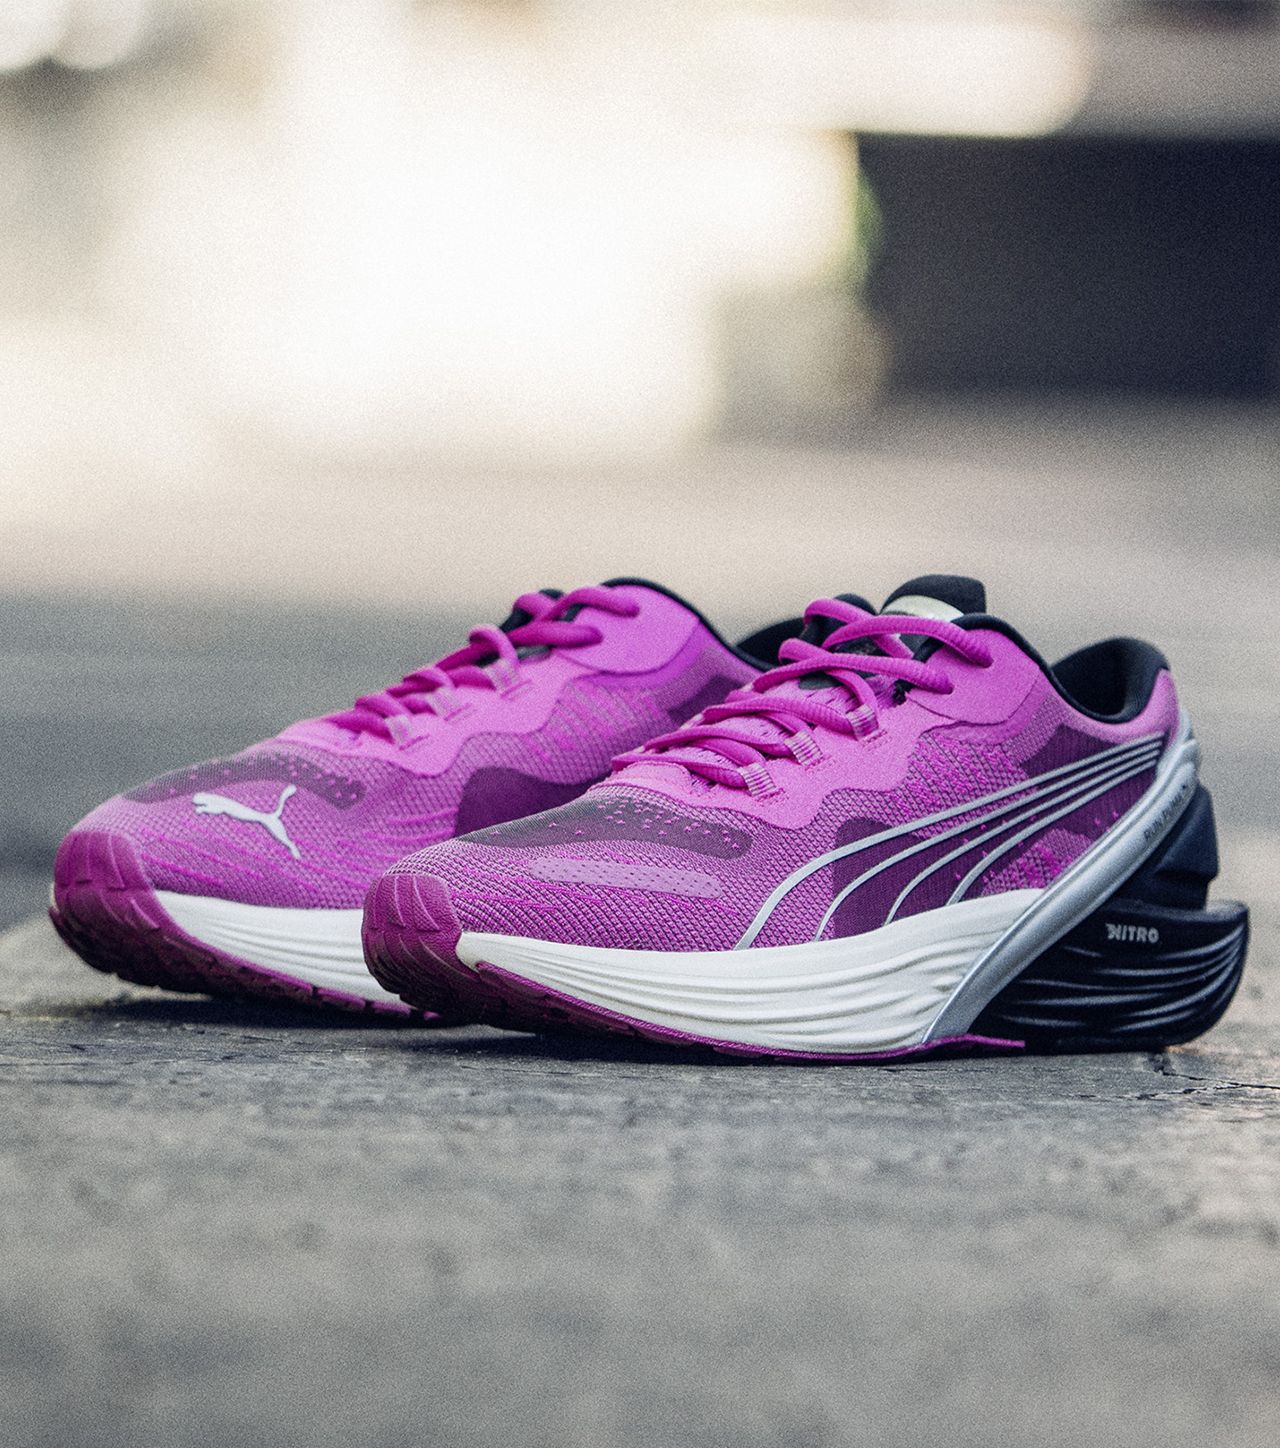 RW Tested: We put Puma's women's running shoe through its paces